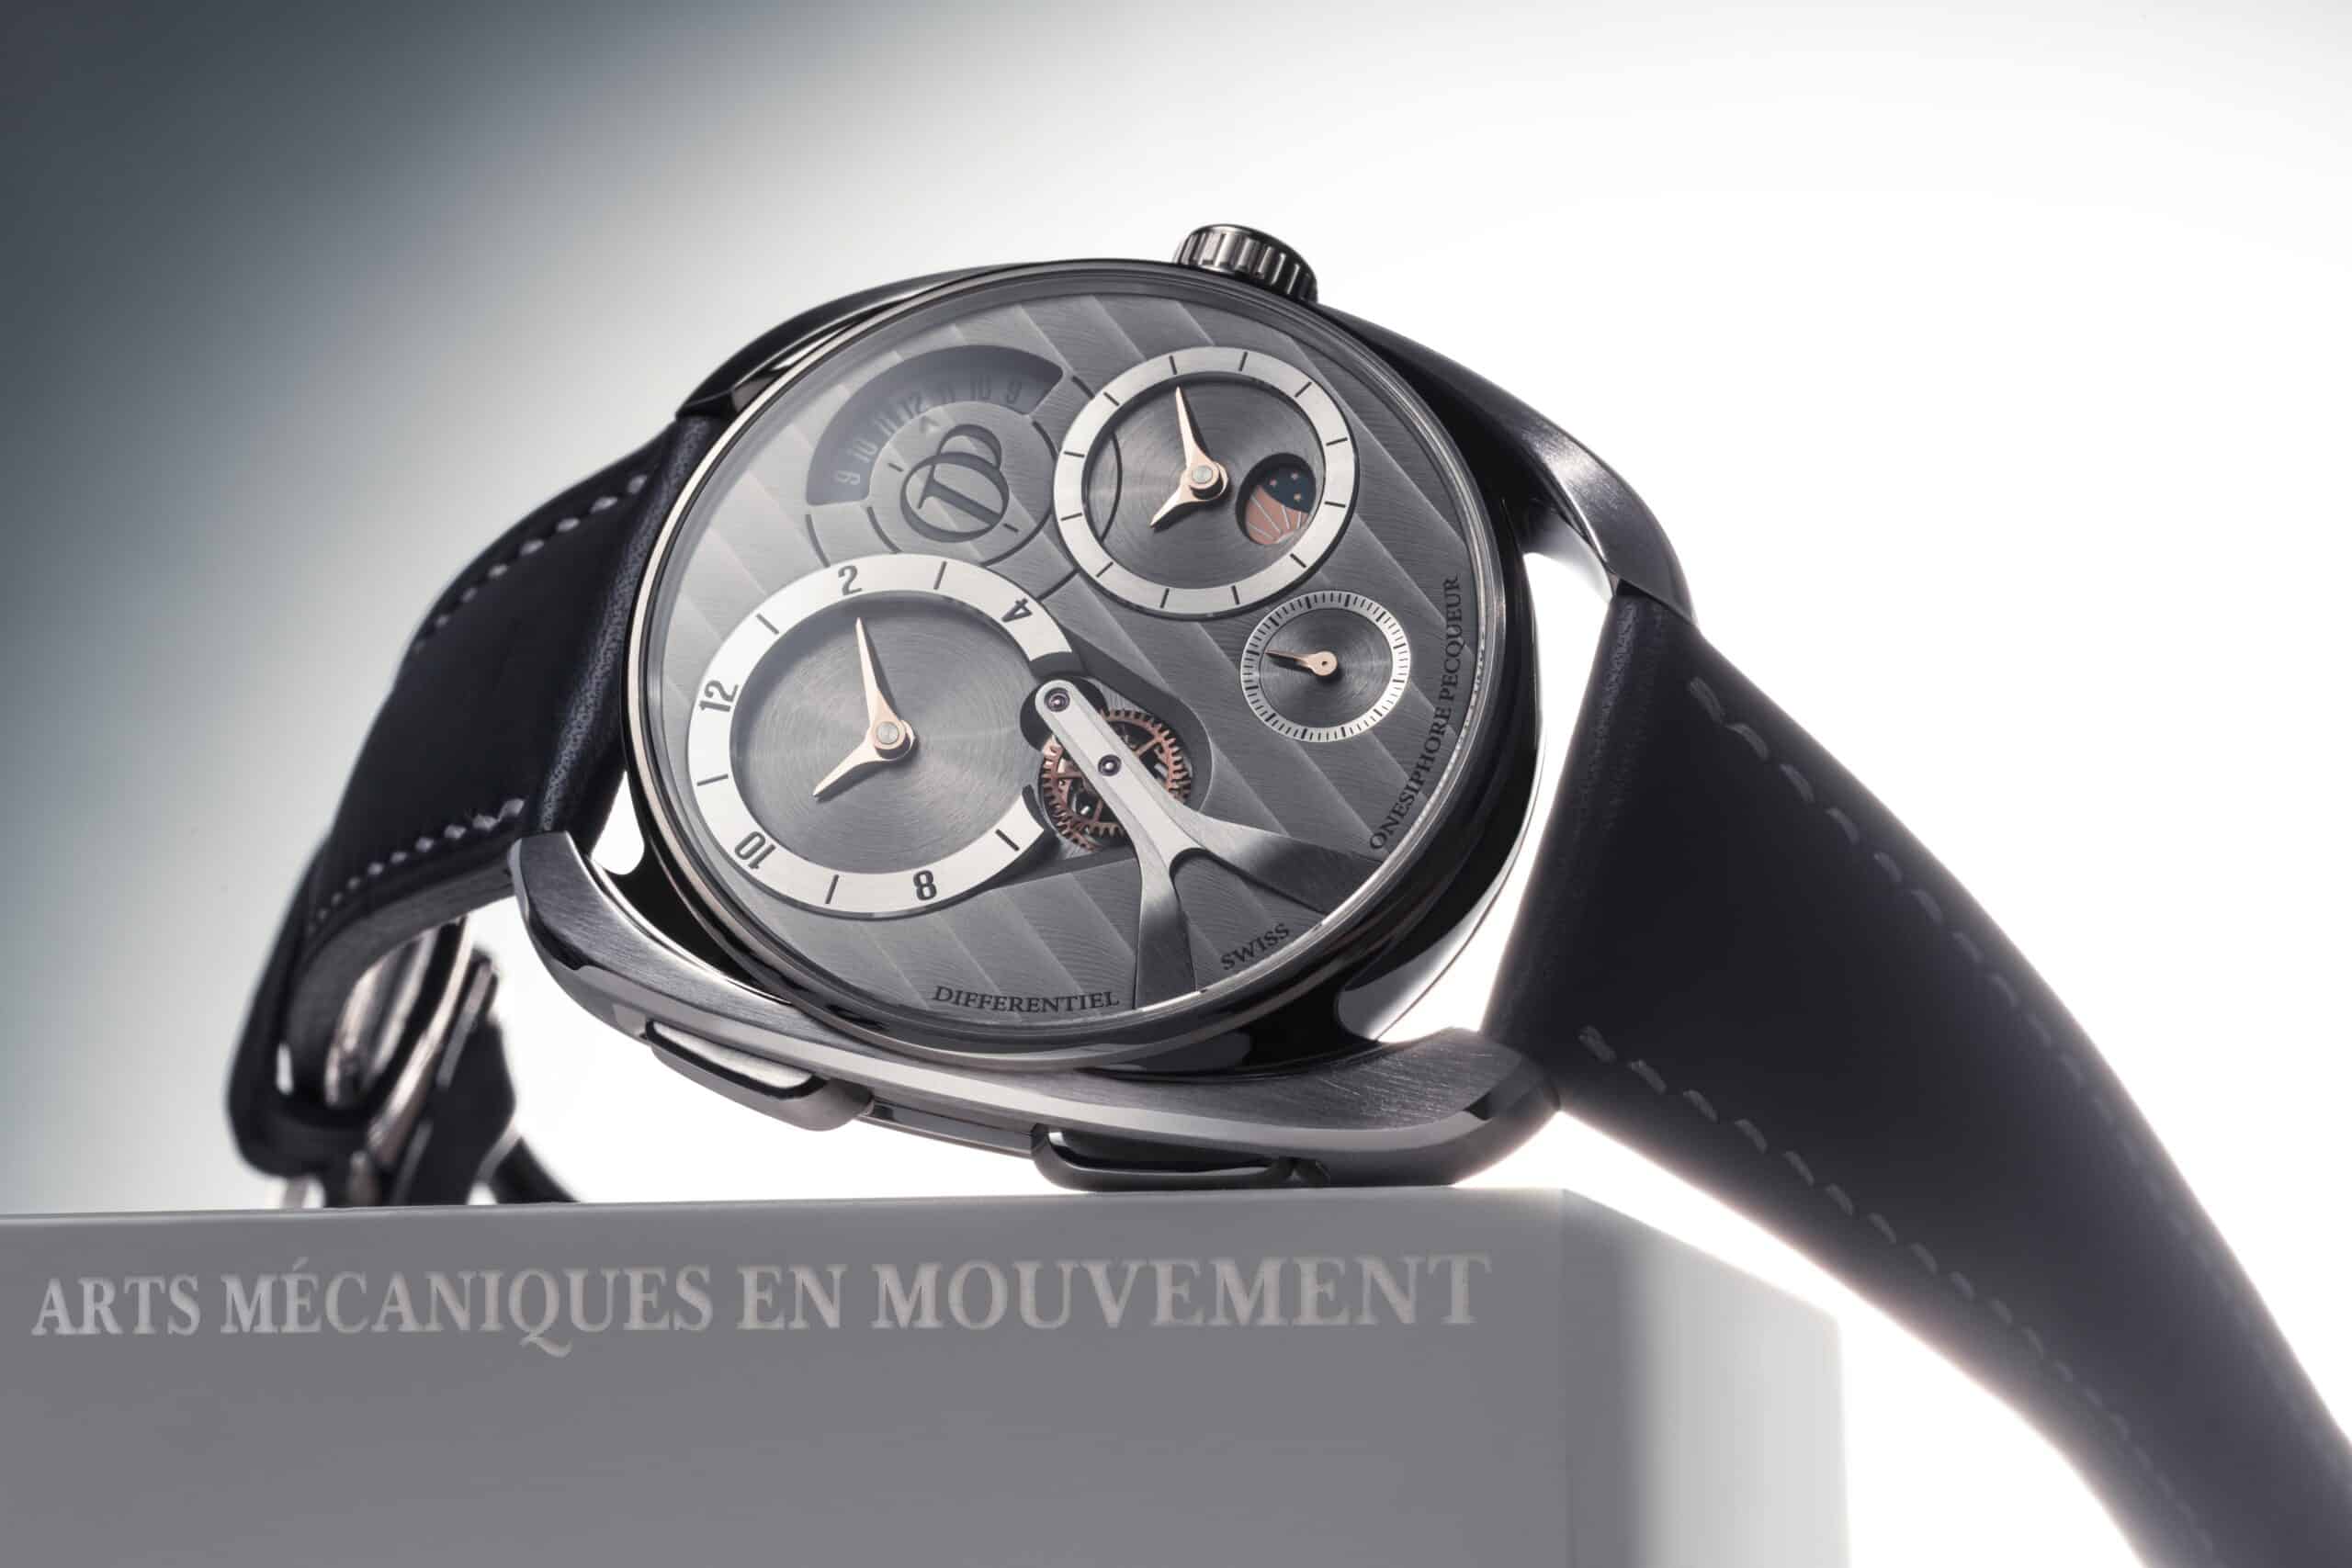 Image - Pecqueur Motorists« First Edition » : Bespoke Monitoring Lifestyle on the wrist